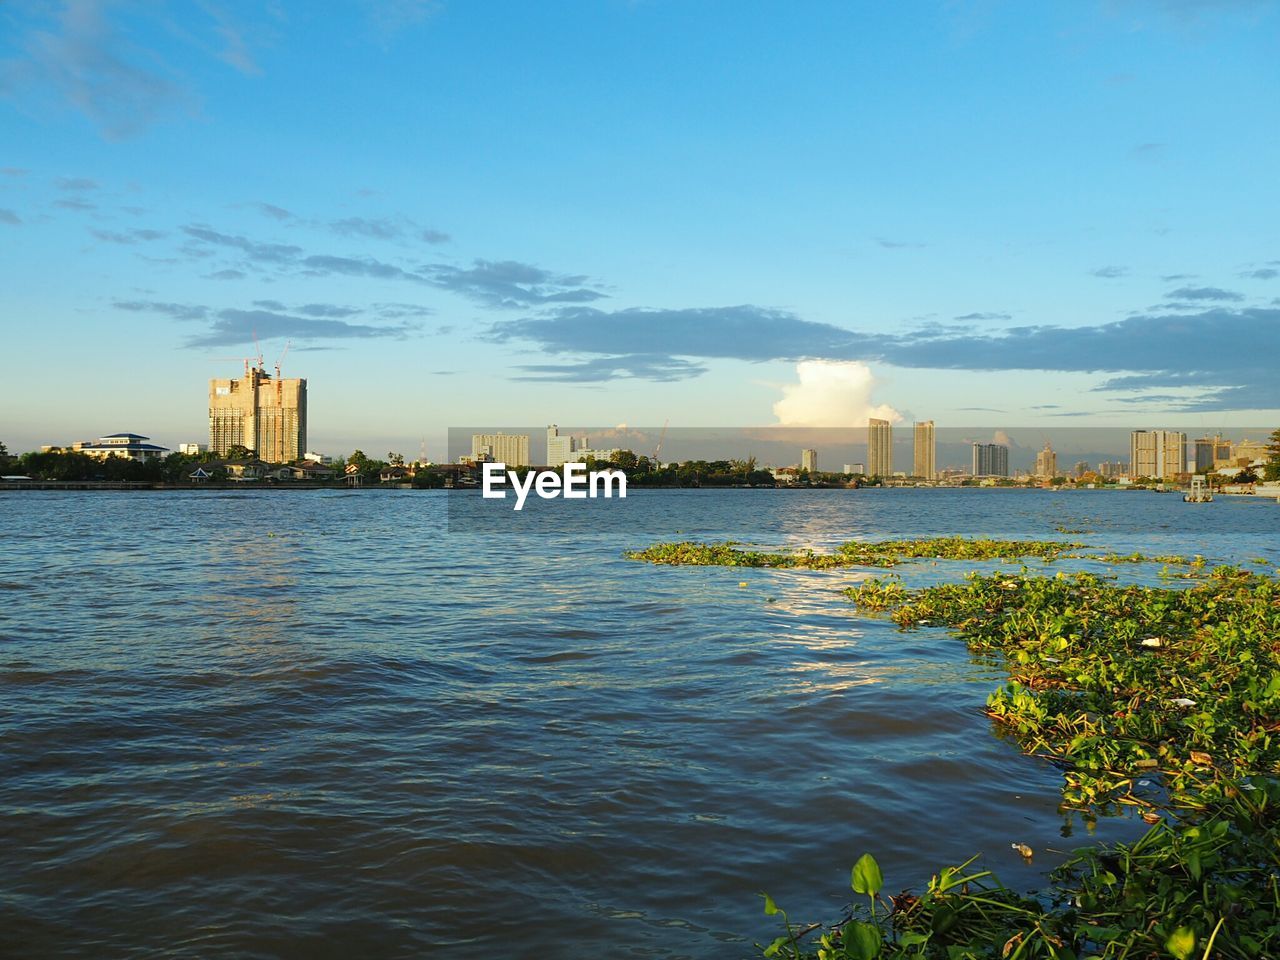 VIEW OF CITYSCAPE BY RIVER AGAINST SKY